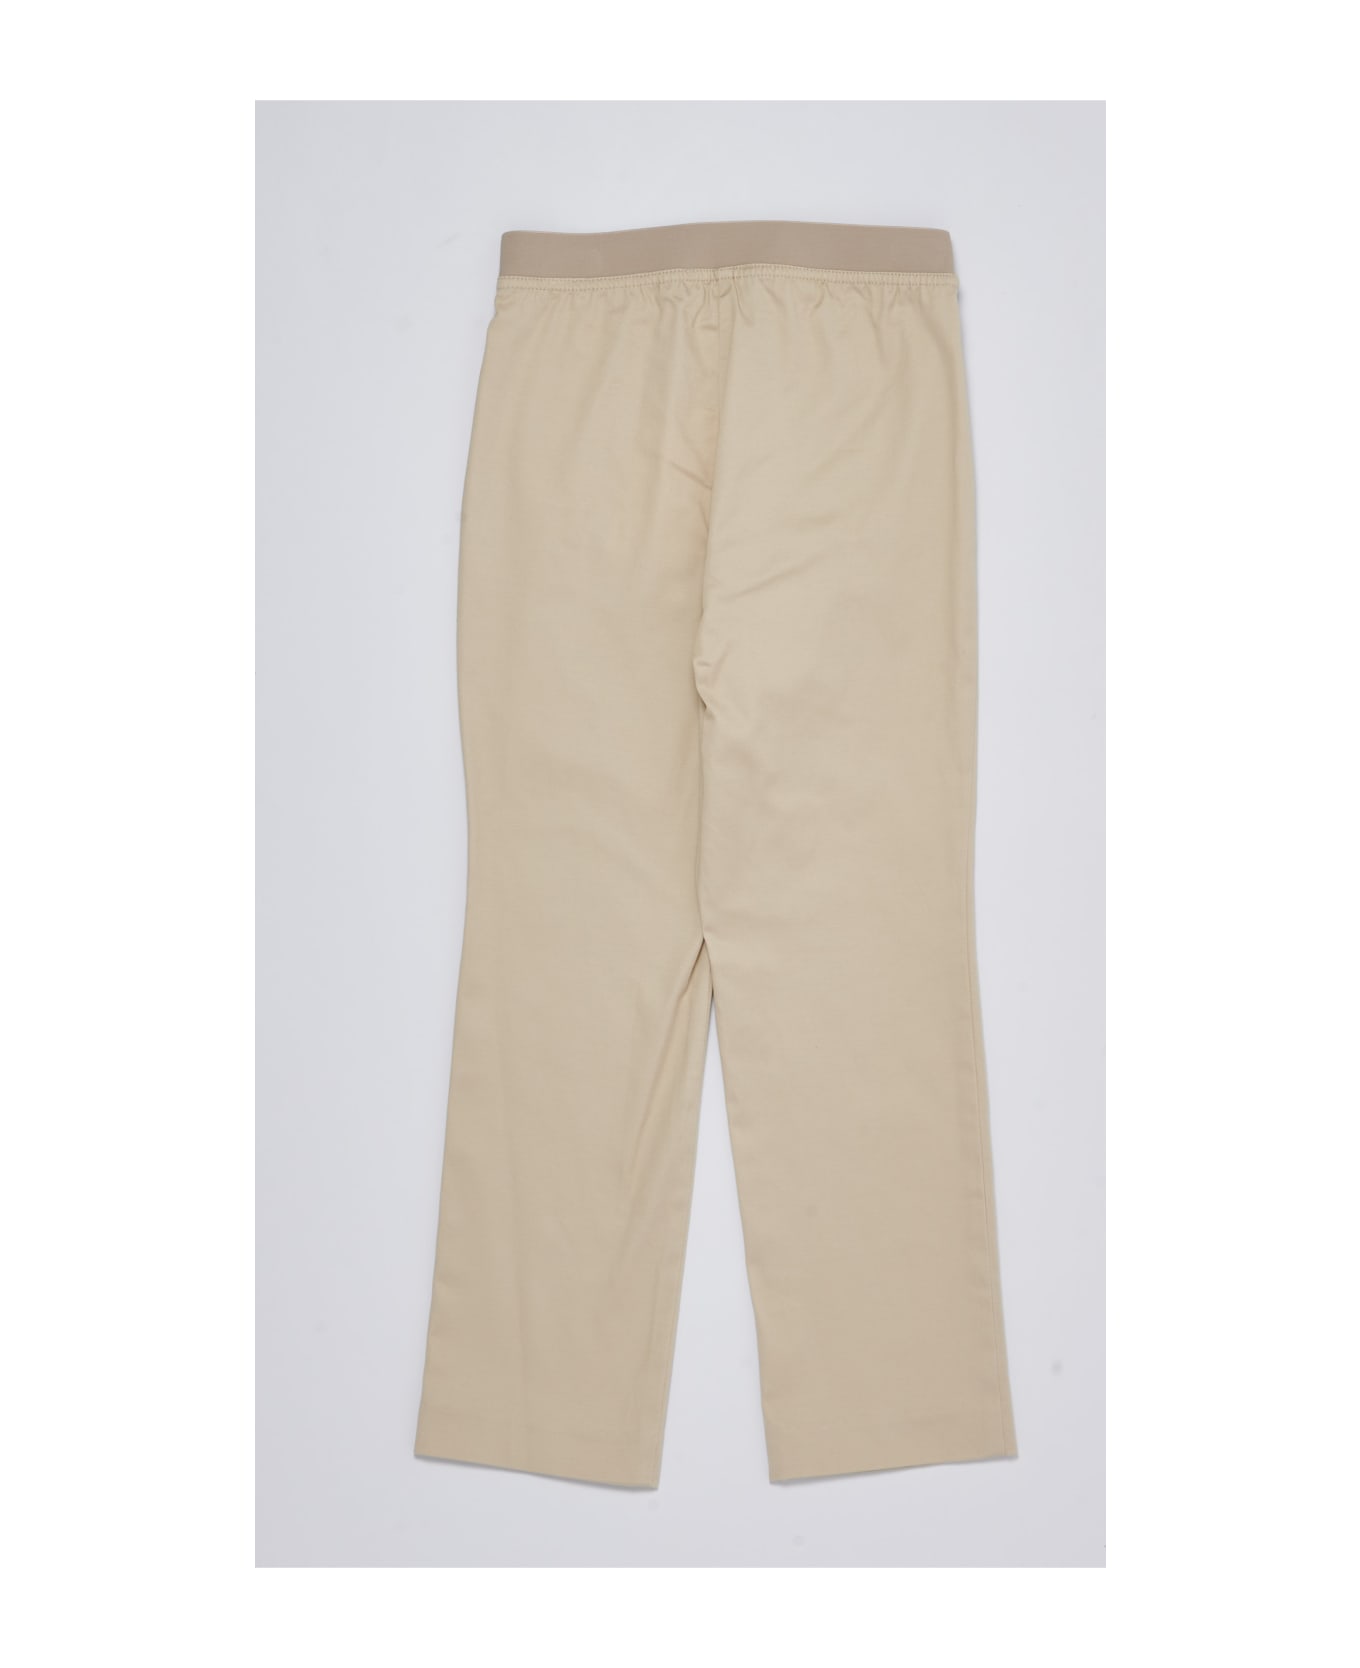 TwinSet Trousers Trousers - BEIGE ボトムス